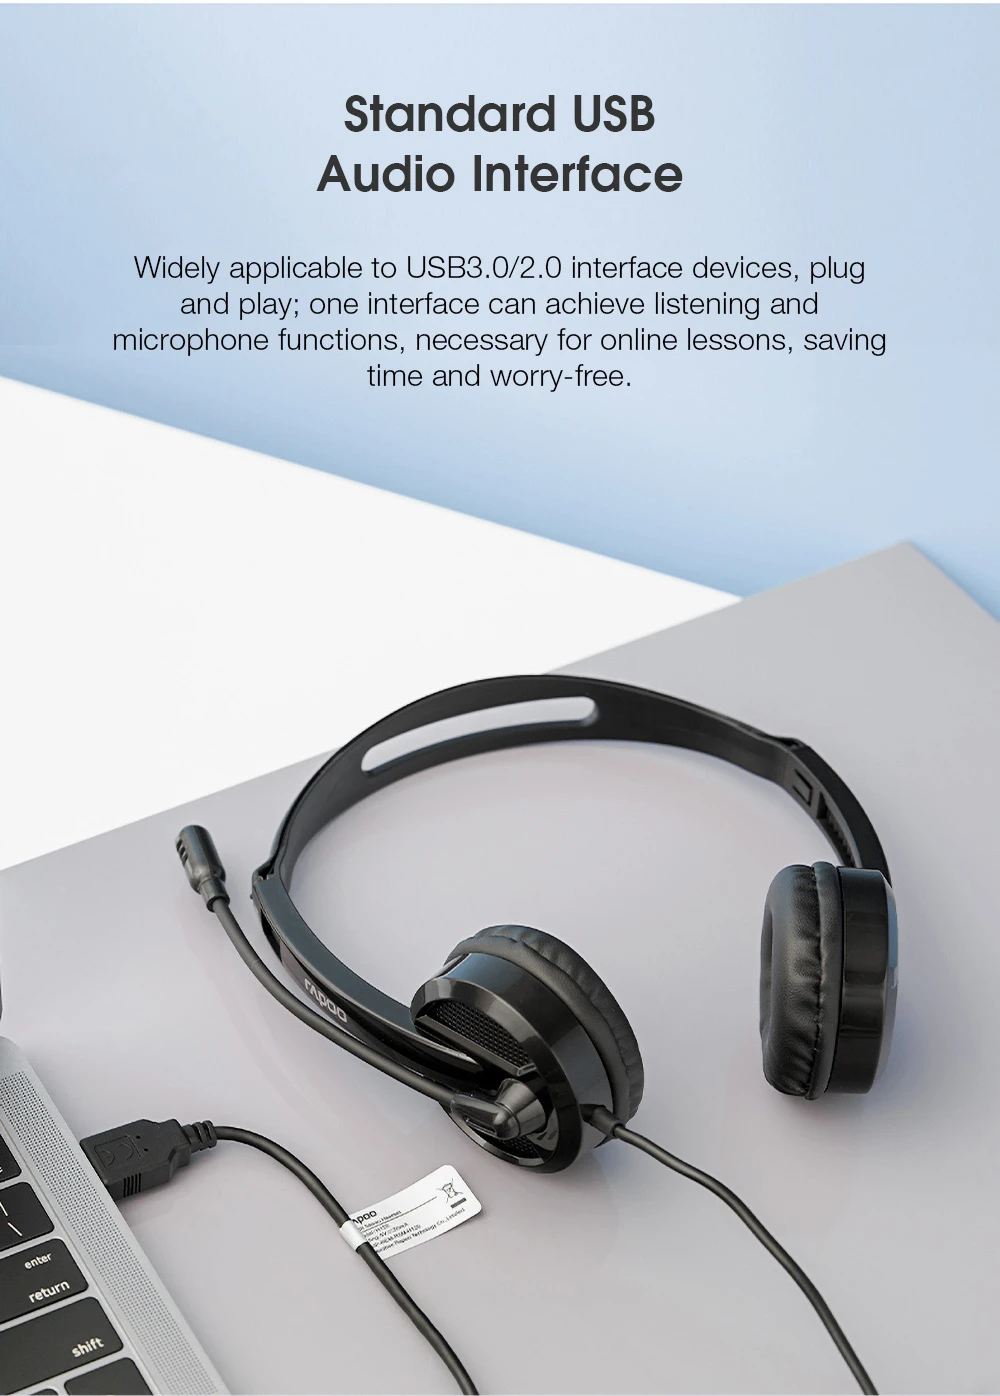 Rapoo USB Stereo Headset Wired - H120